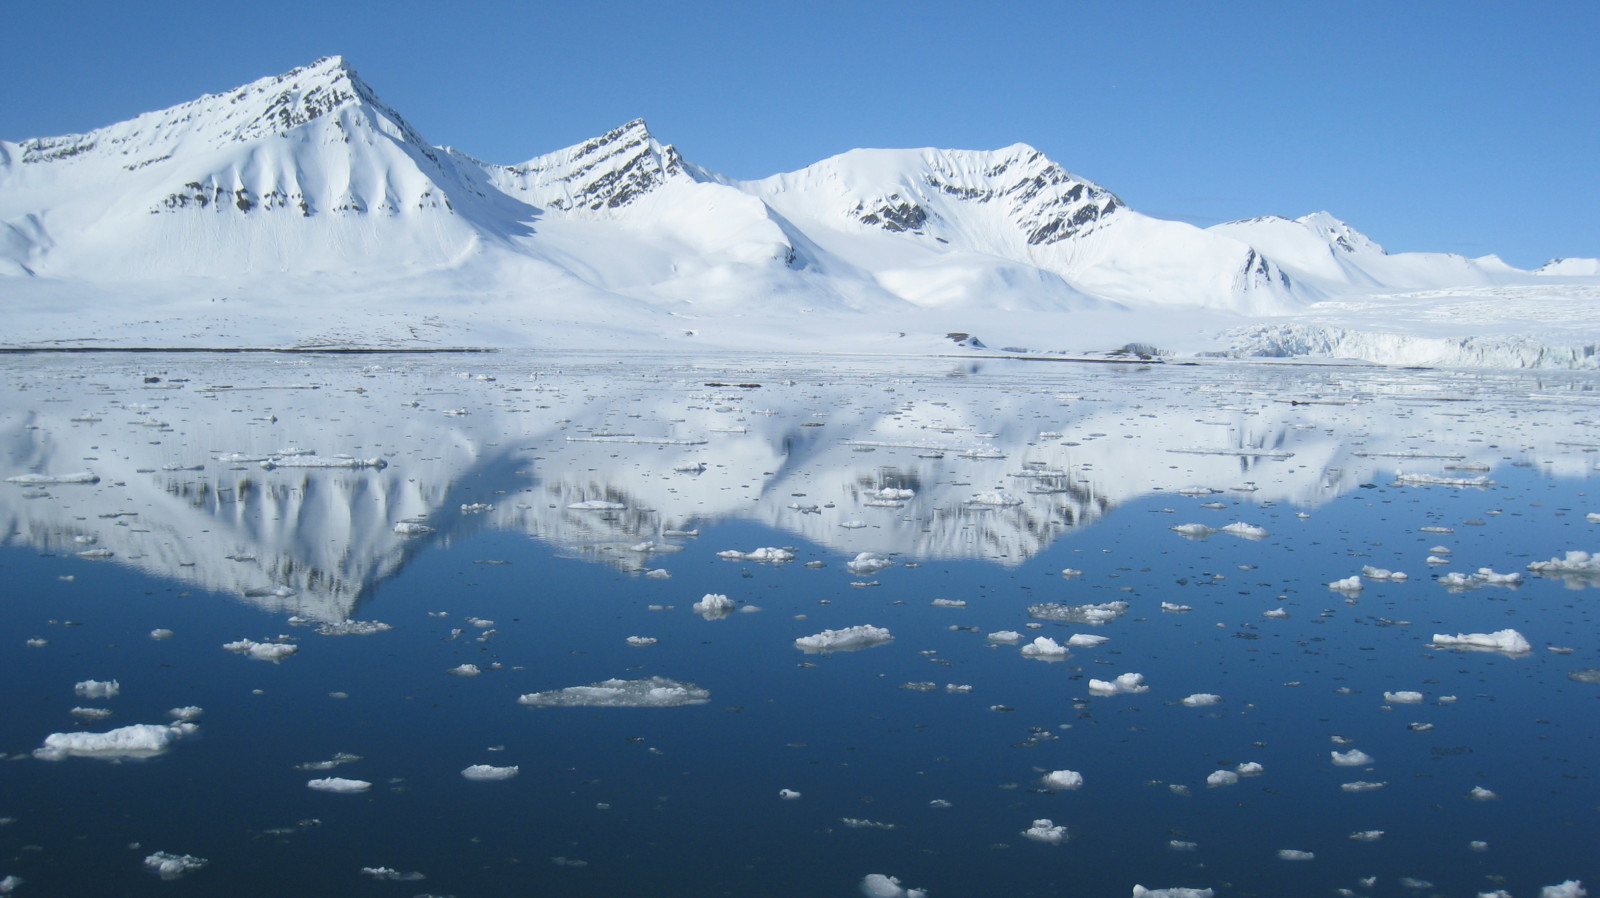 Summary of Field Work on Sea Ice performed in Svalbard, March 2018